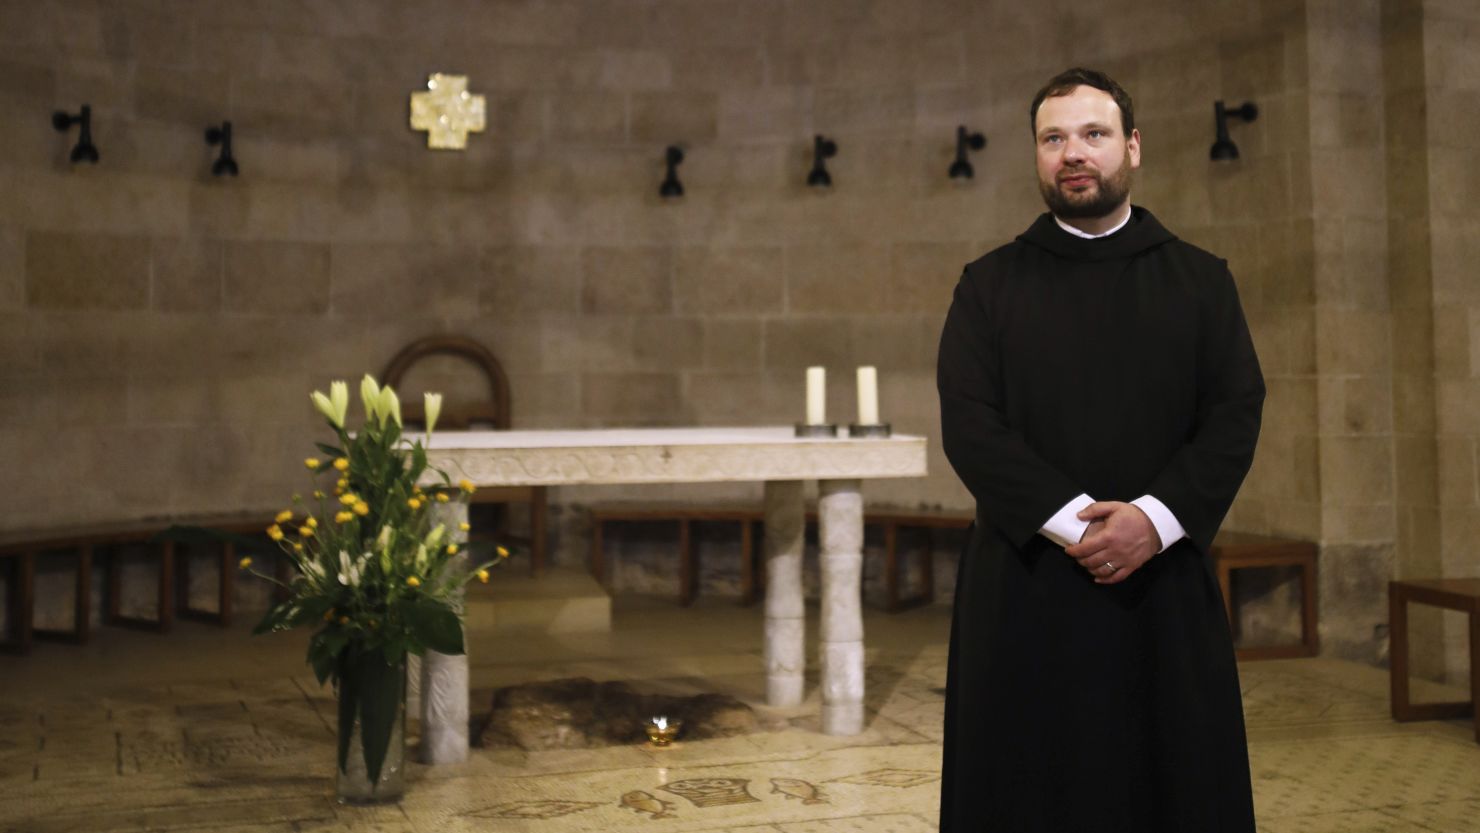 Father Nikodemus Schnabel is pictured in the Church of the Multiplication in Tabgha, Israel, in this file image from February 2017.